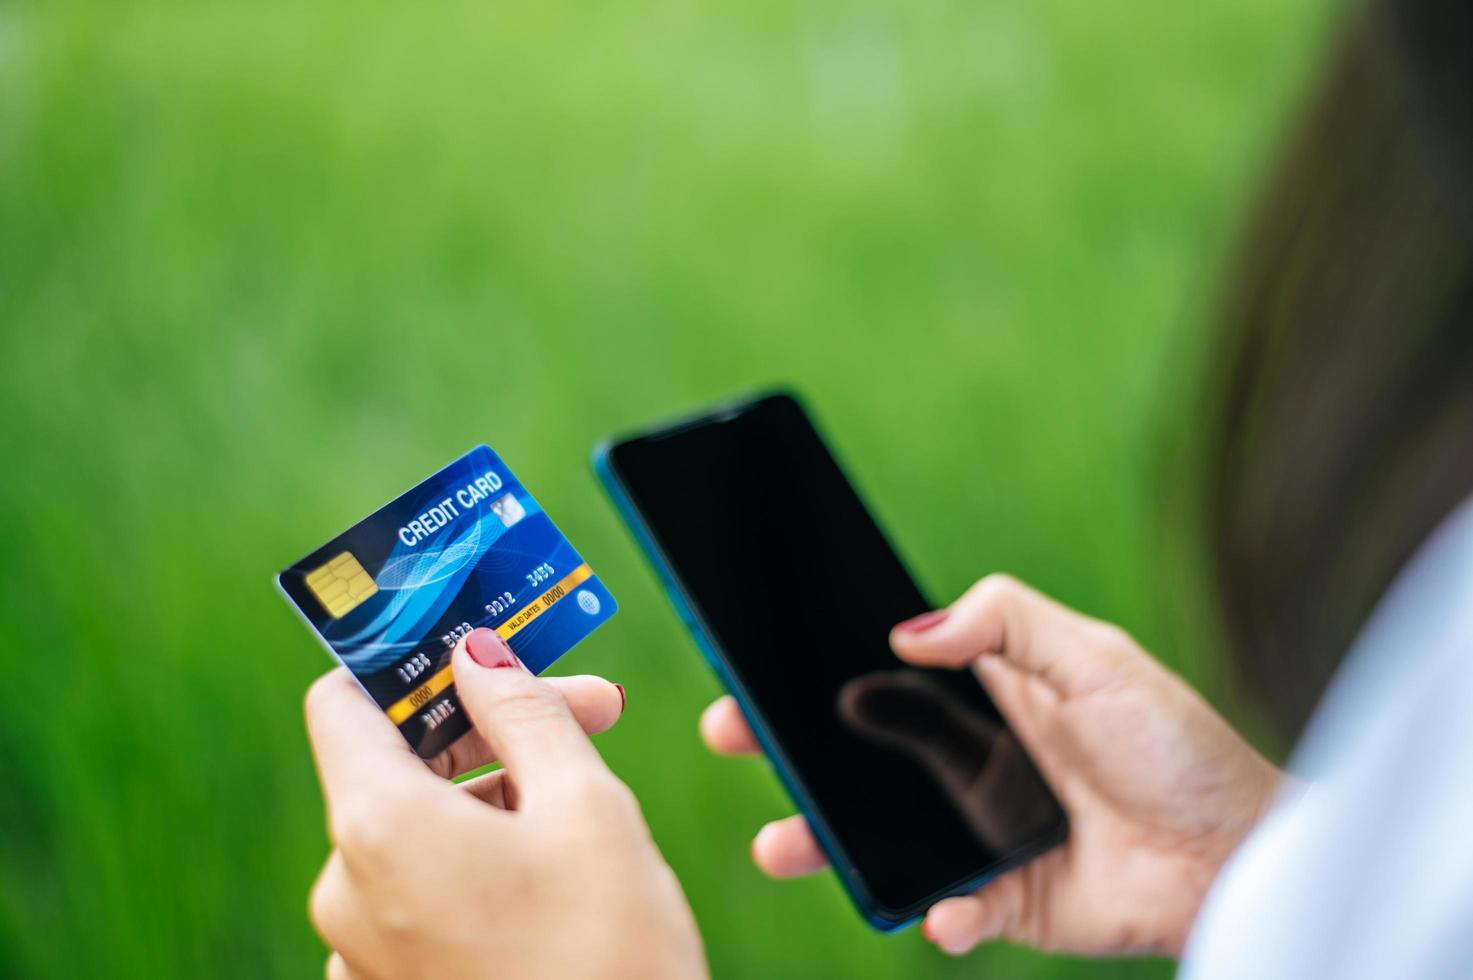 Payment for goods by credit card via smartphone photo